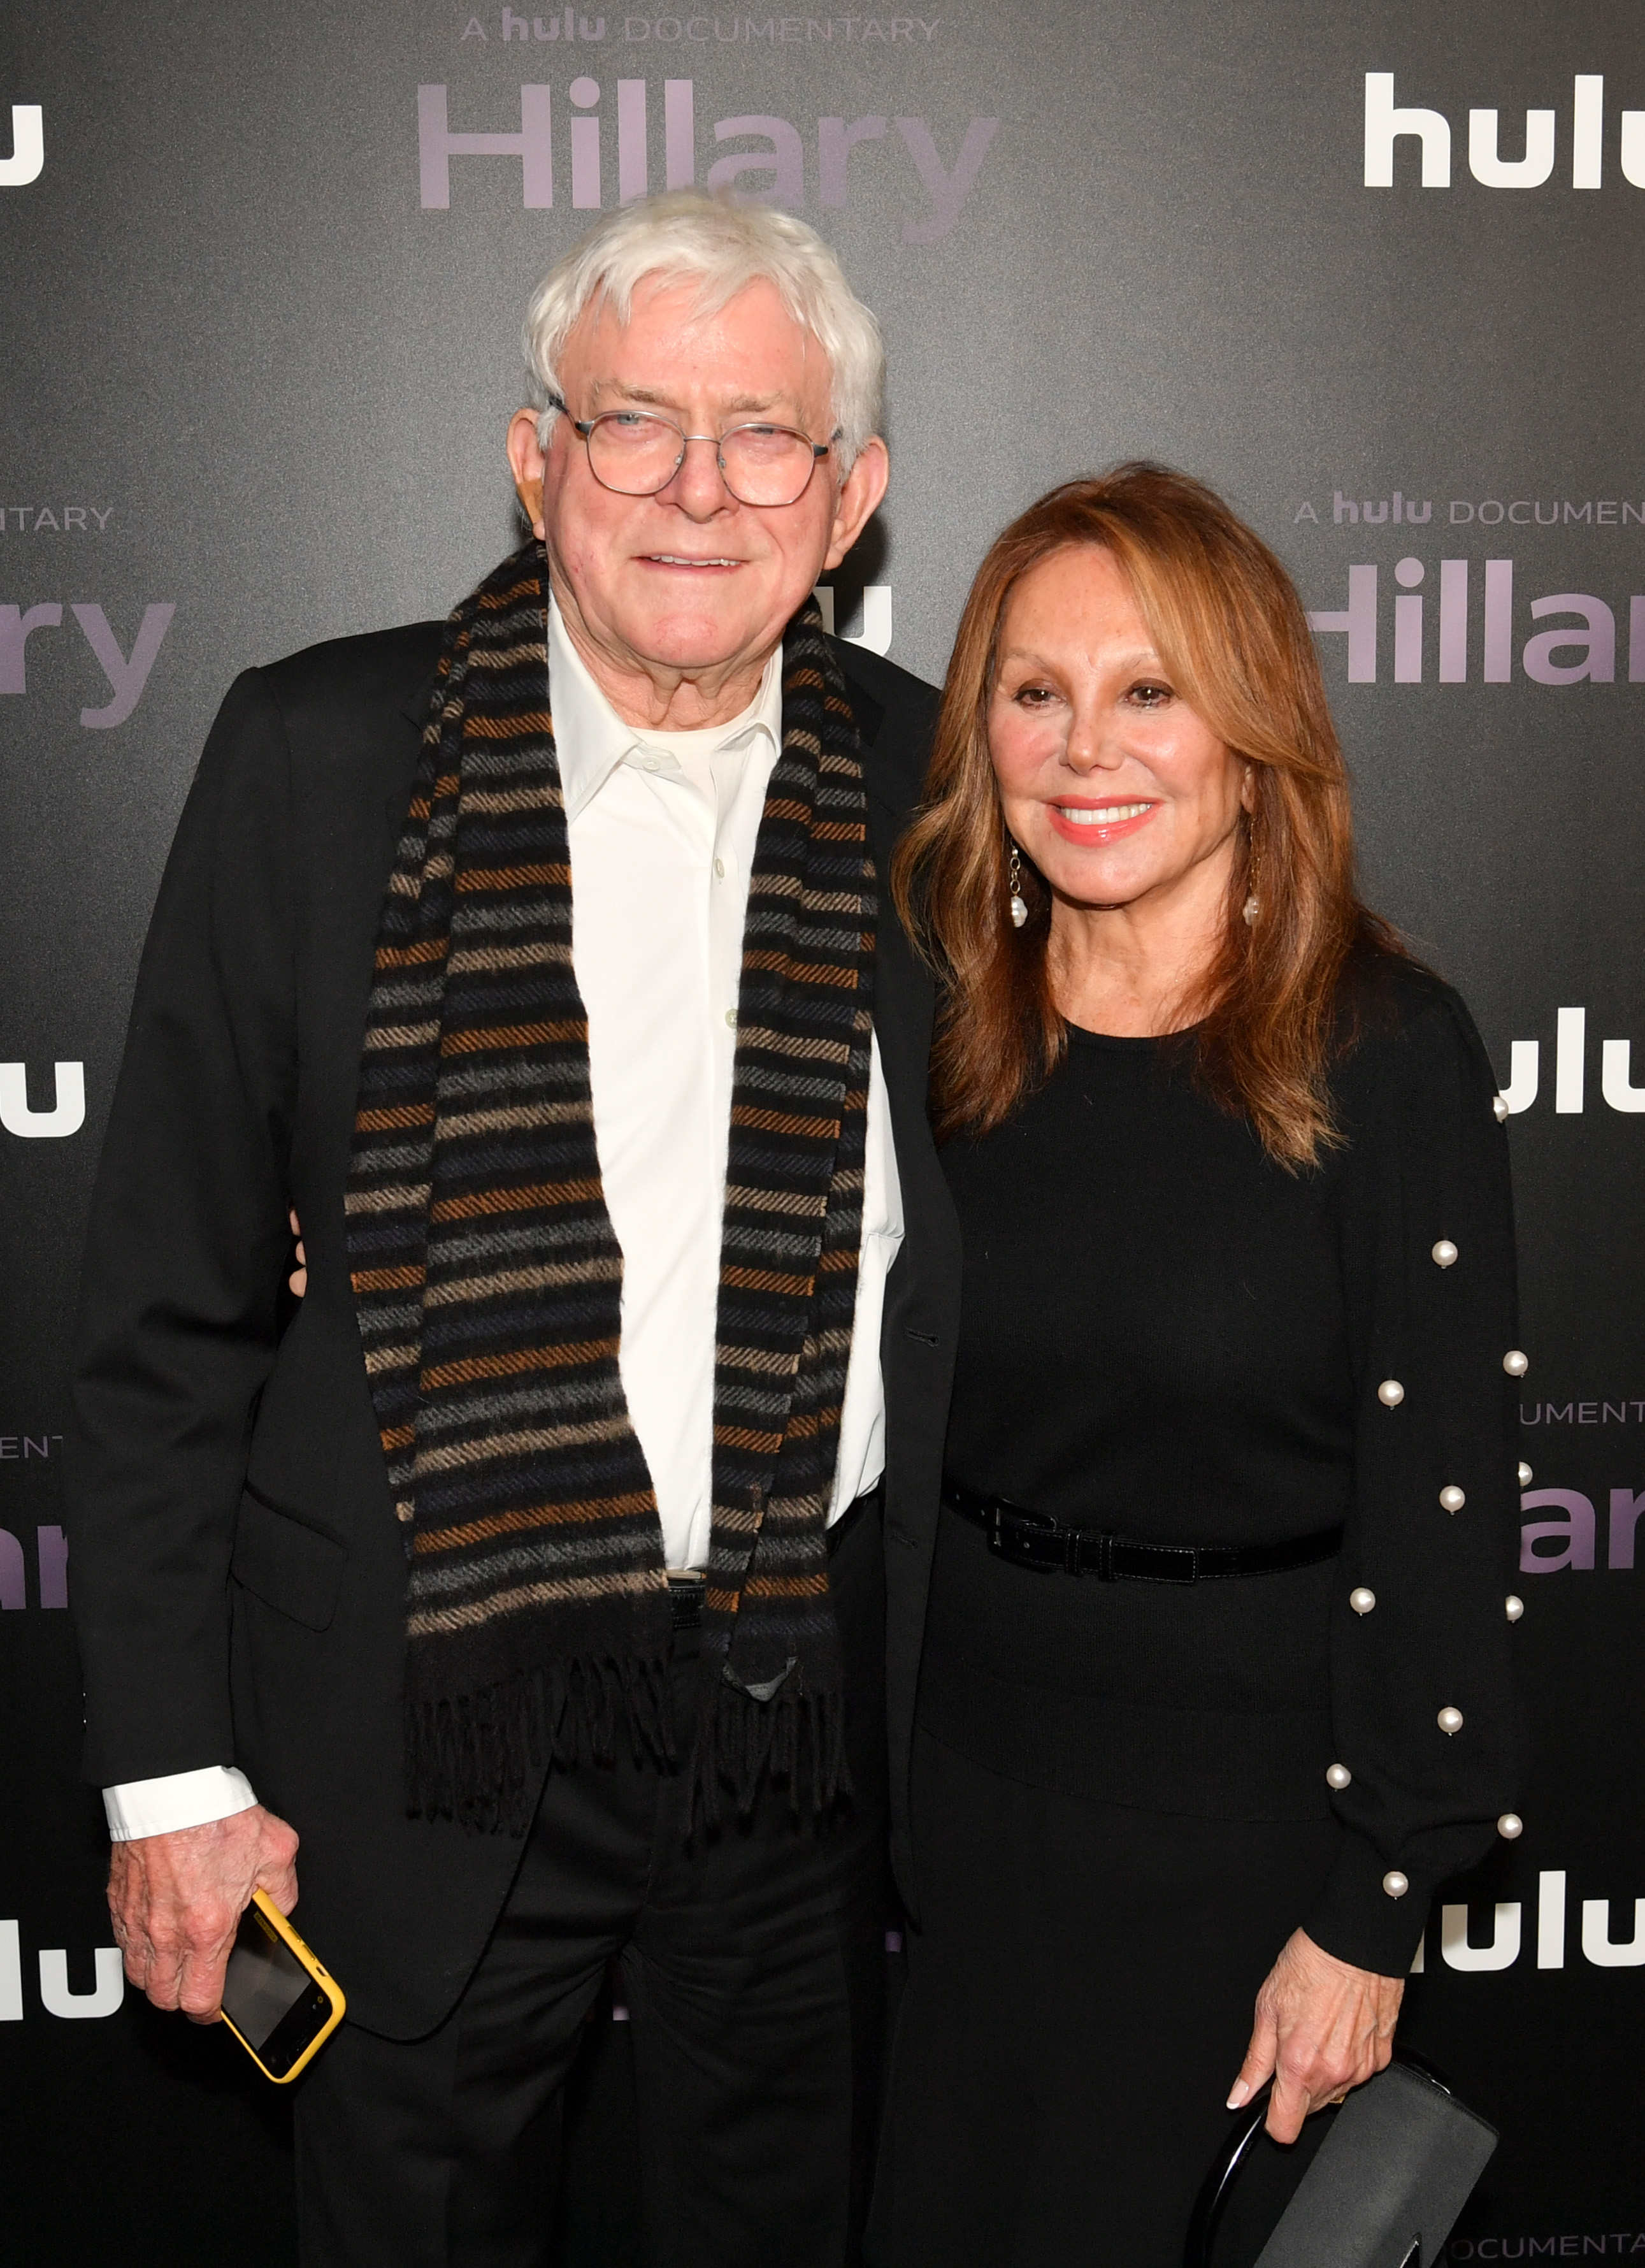 Phil Donahue and Marlo Thomas at the "Hillary" film premiere, in New York, on March 4, 2020 | Source: Getty Images